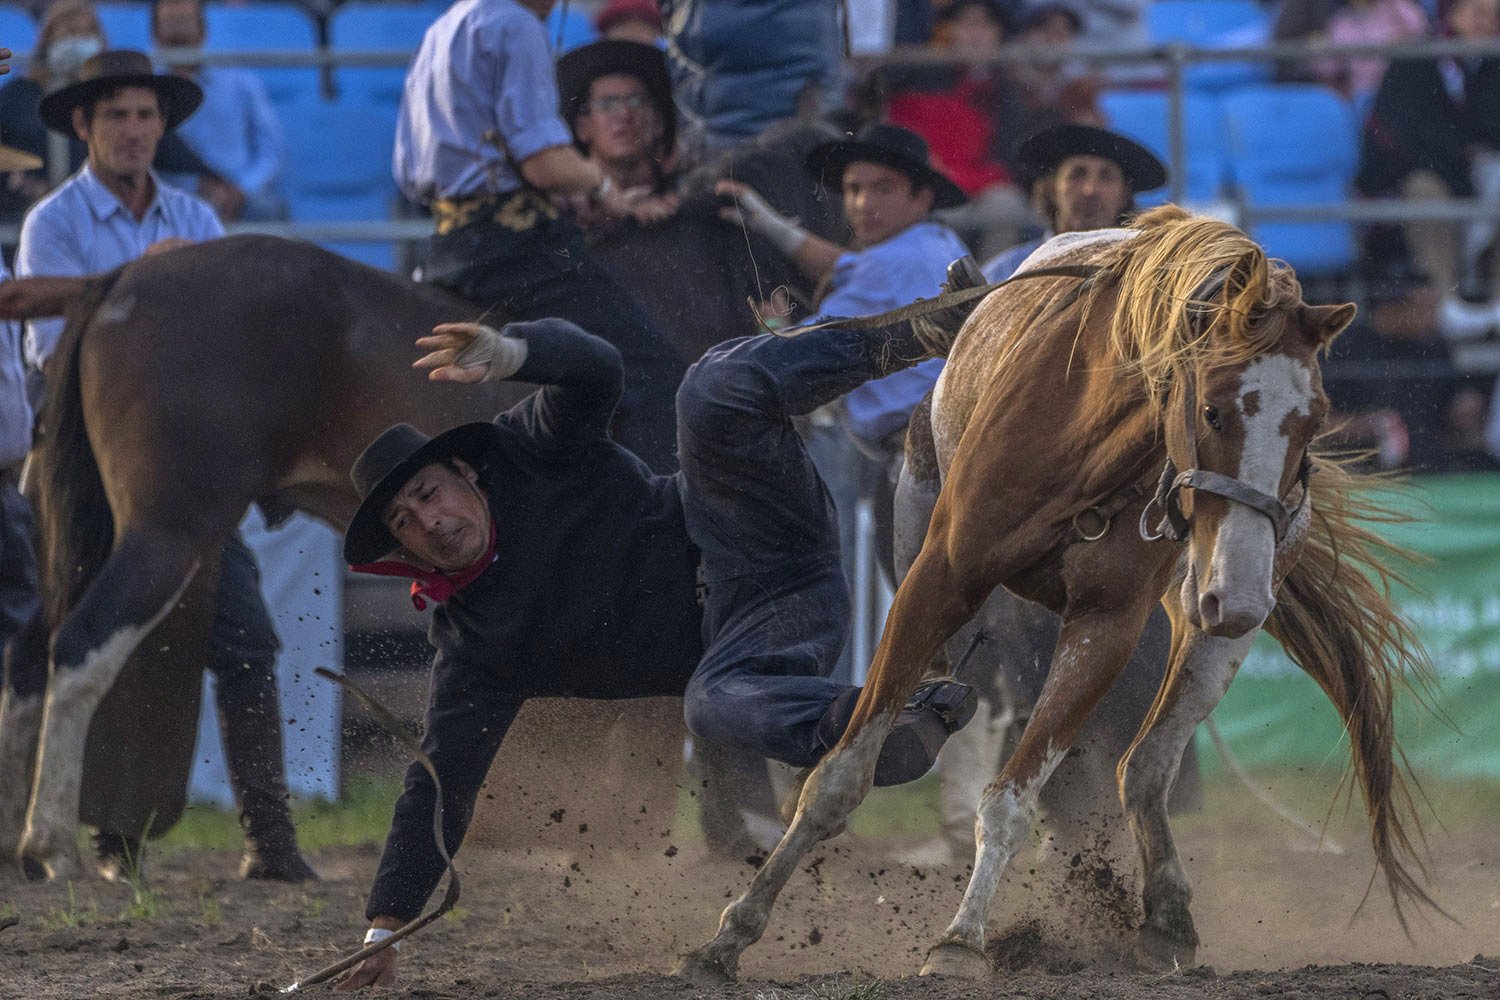  A “gaucho,” or cowboy, falls from a horse during Criolla Week rodeo in Montevideo, Uruguay, Thursday, April 14, 2022. Since 1925, the festival brings cowboys to the capital who tame and ride wild horses. (AP Photo/Matilde Campodonico) 